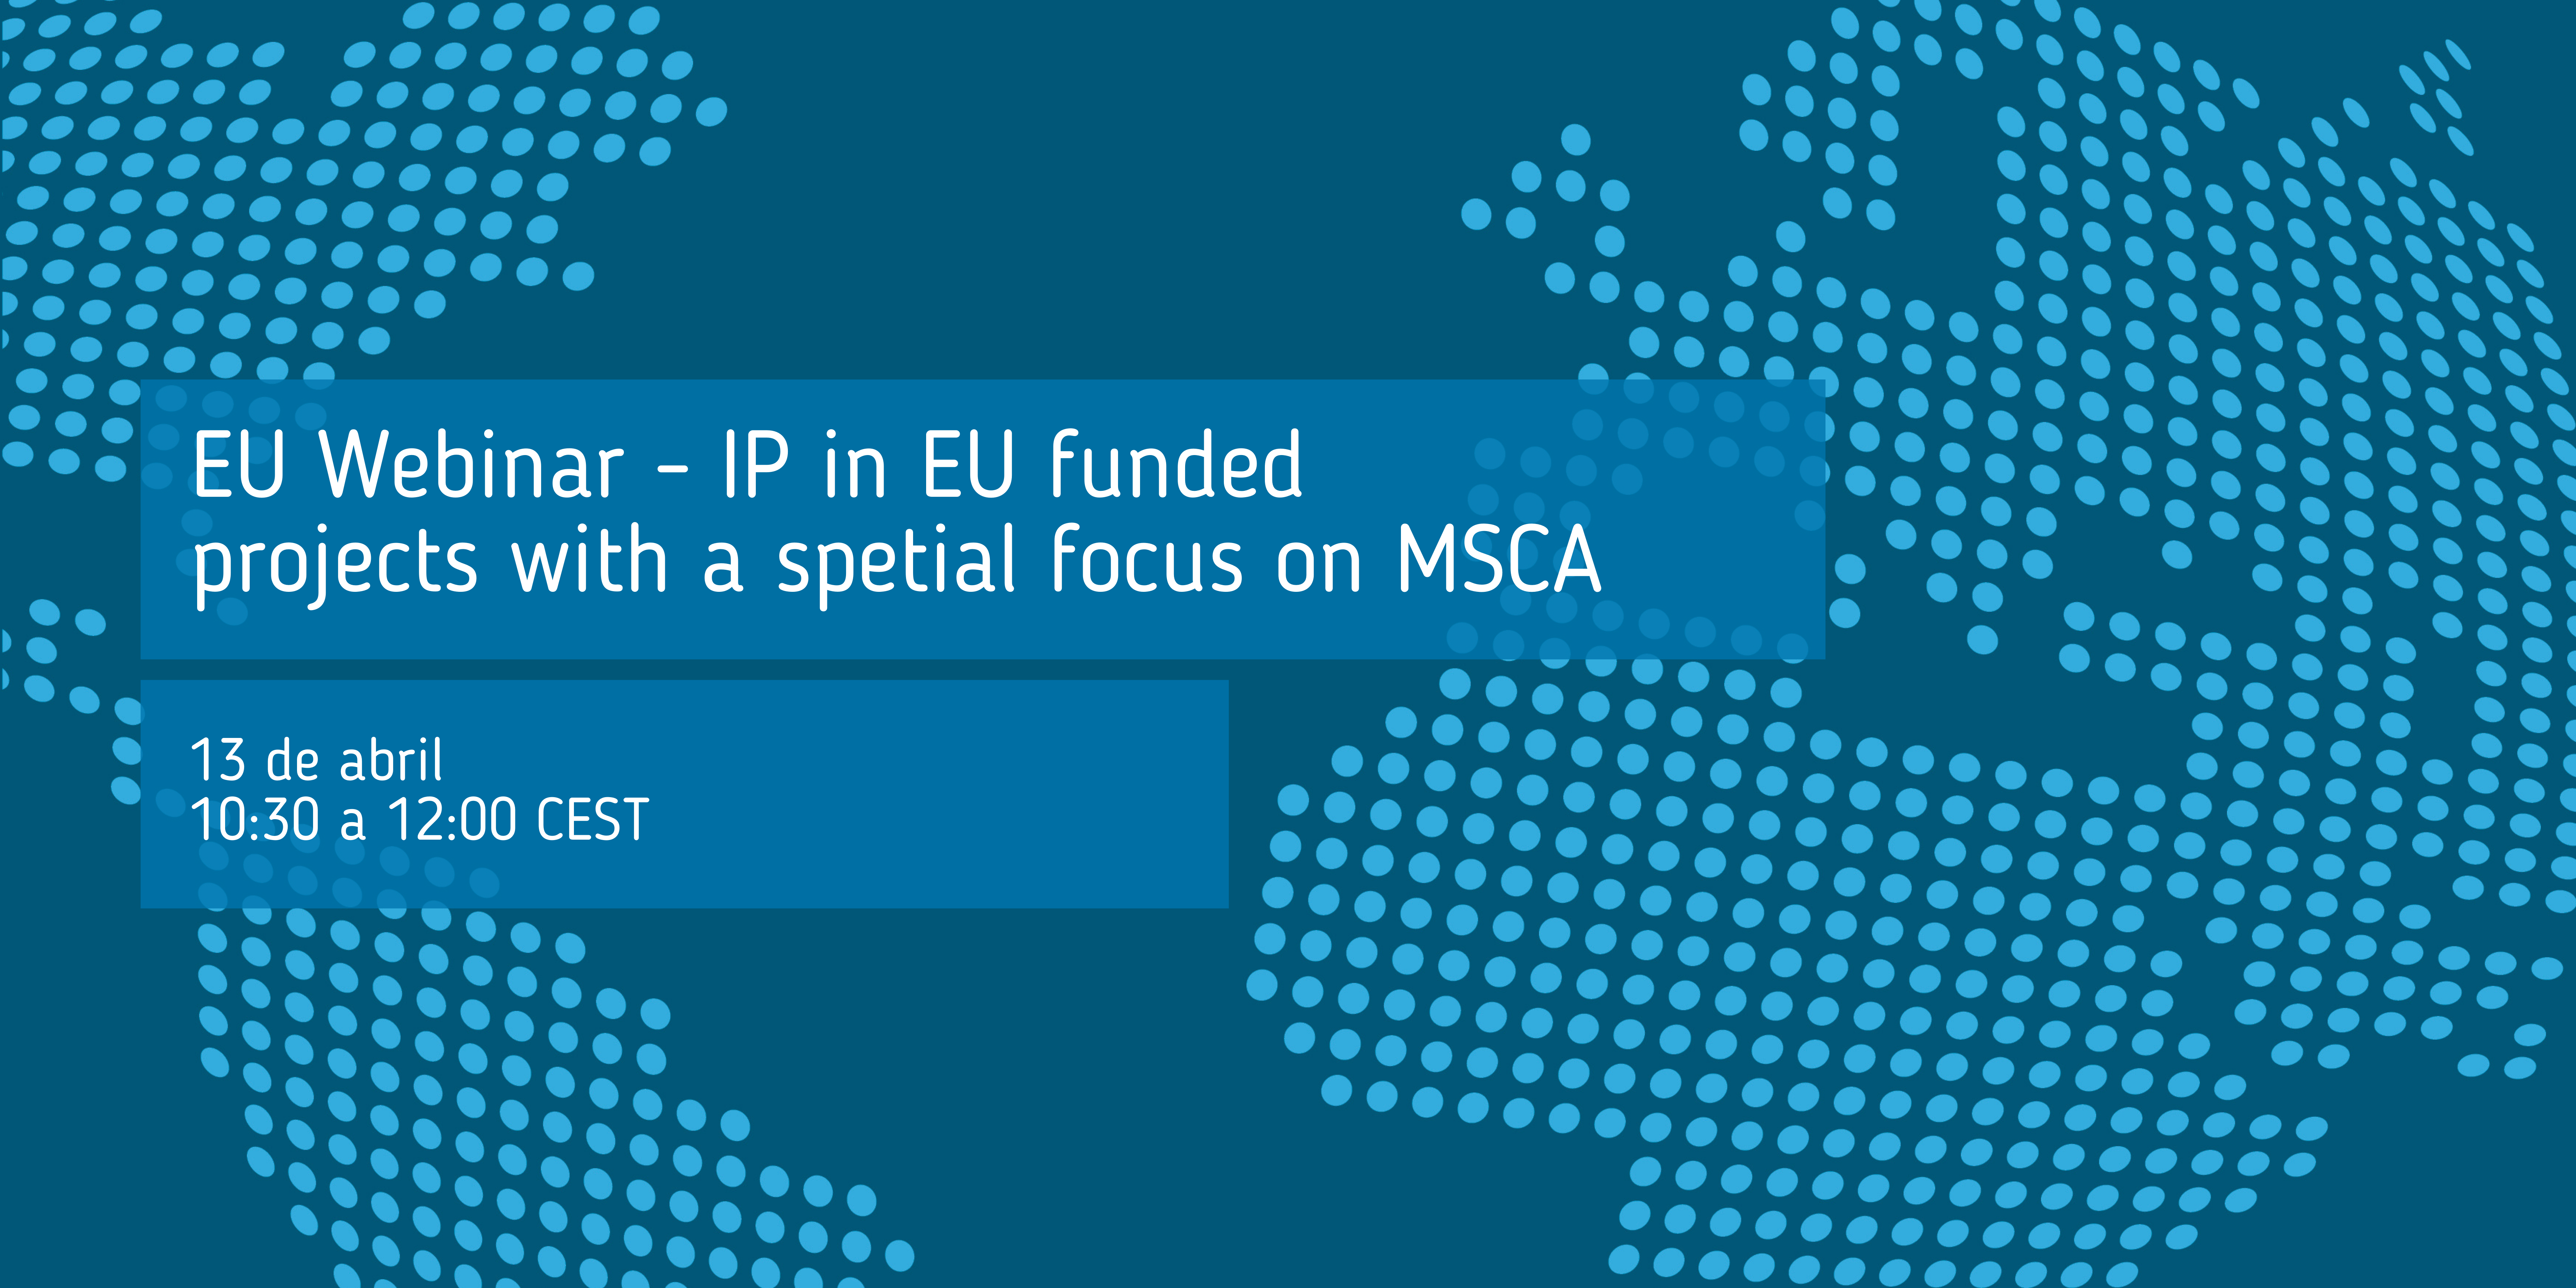 EU_Webinar_IP_in_EU_funded_projects_with_a_special_focus_on_MSCA